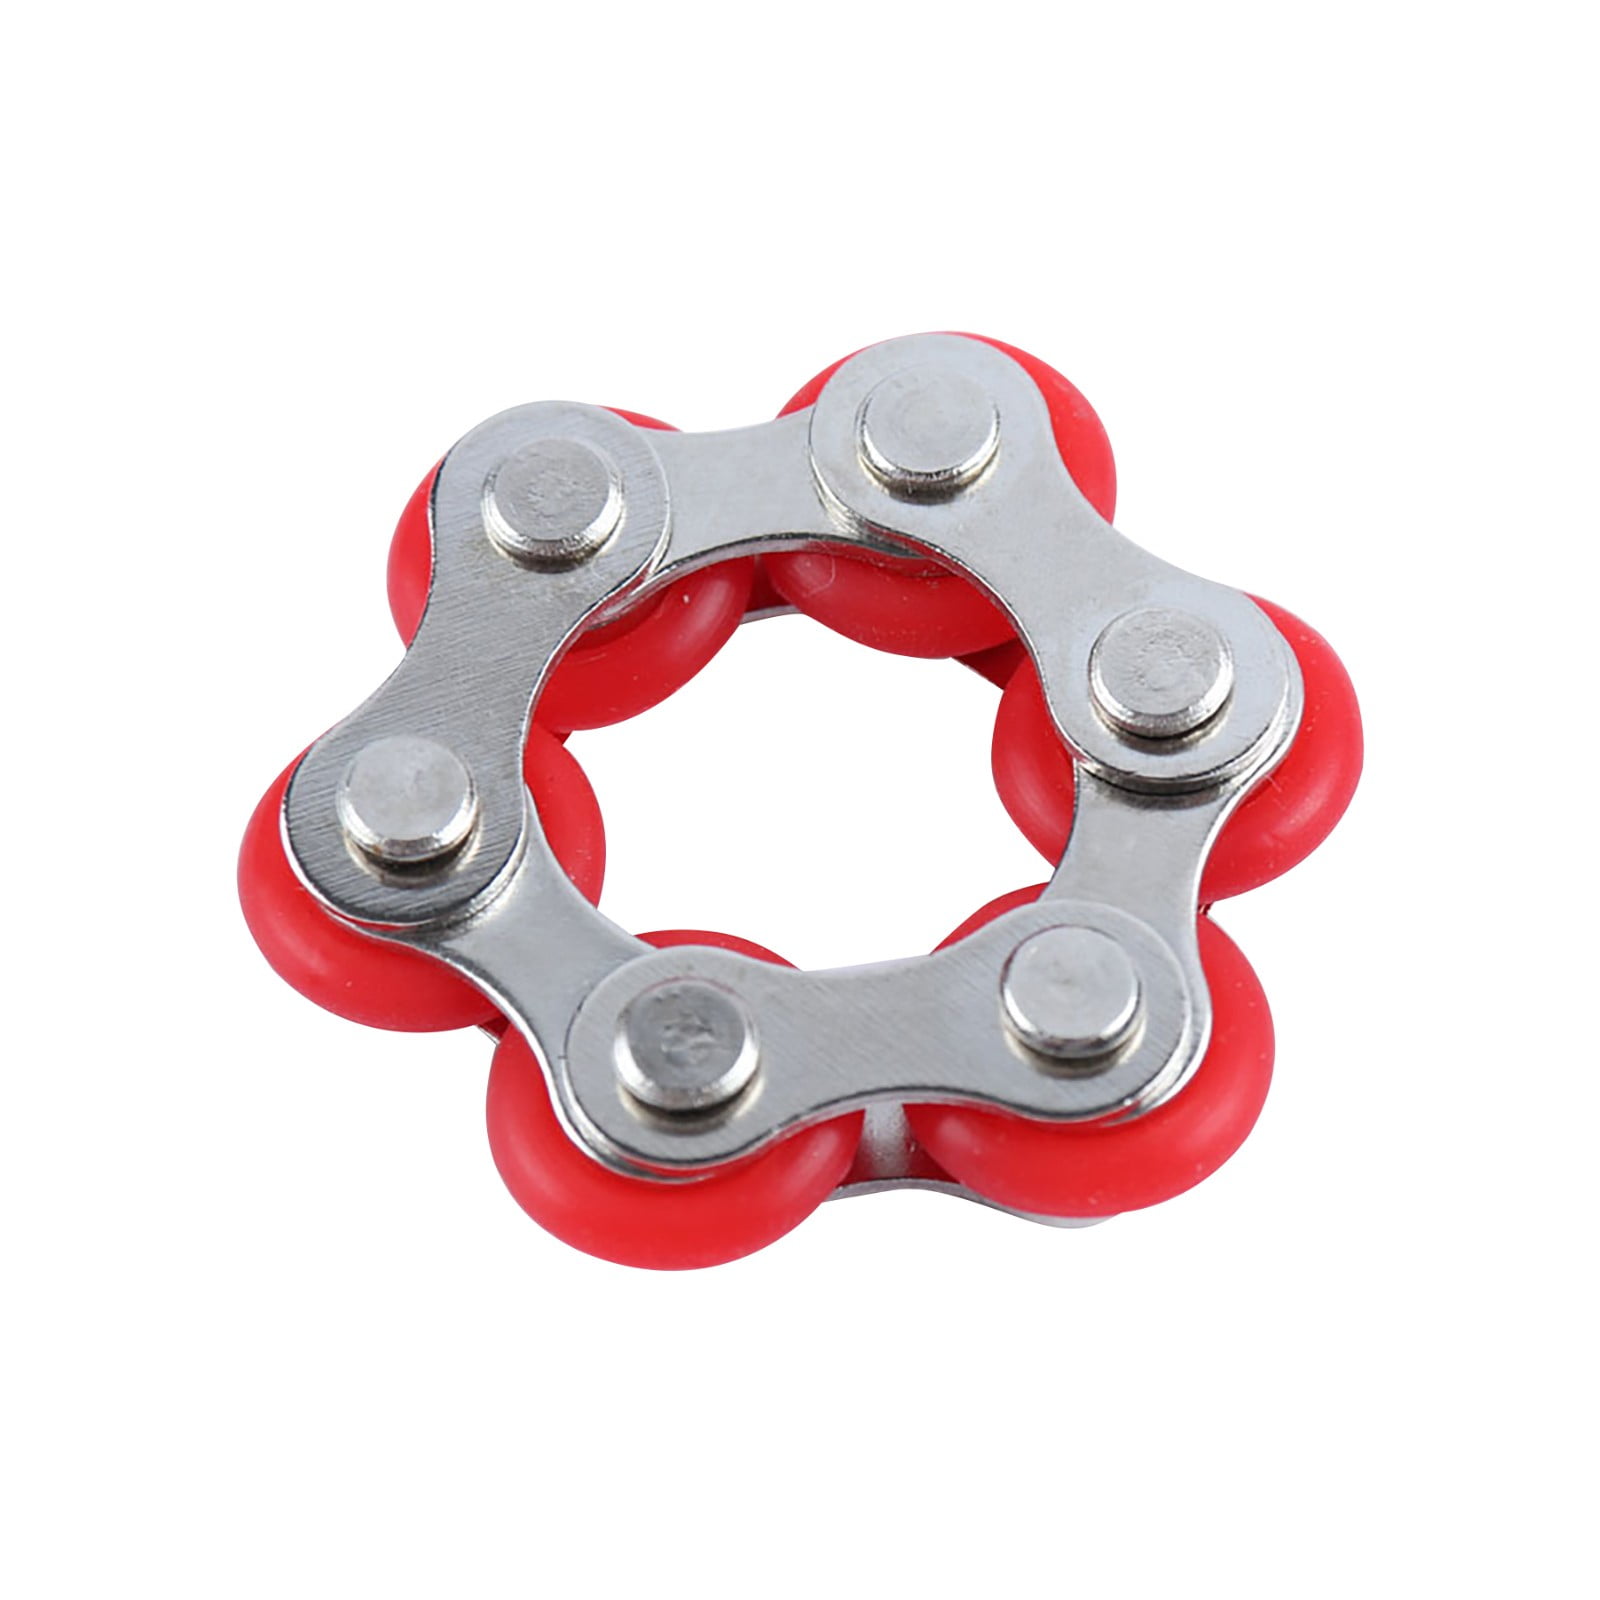 Roller Chain Fidget Toy Stress Reducer for ADHd Anxiety Autism Adult Relief US 